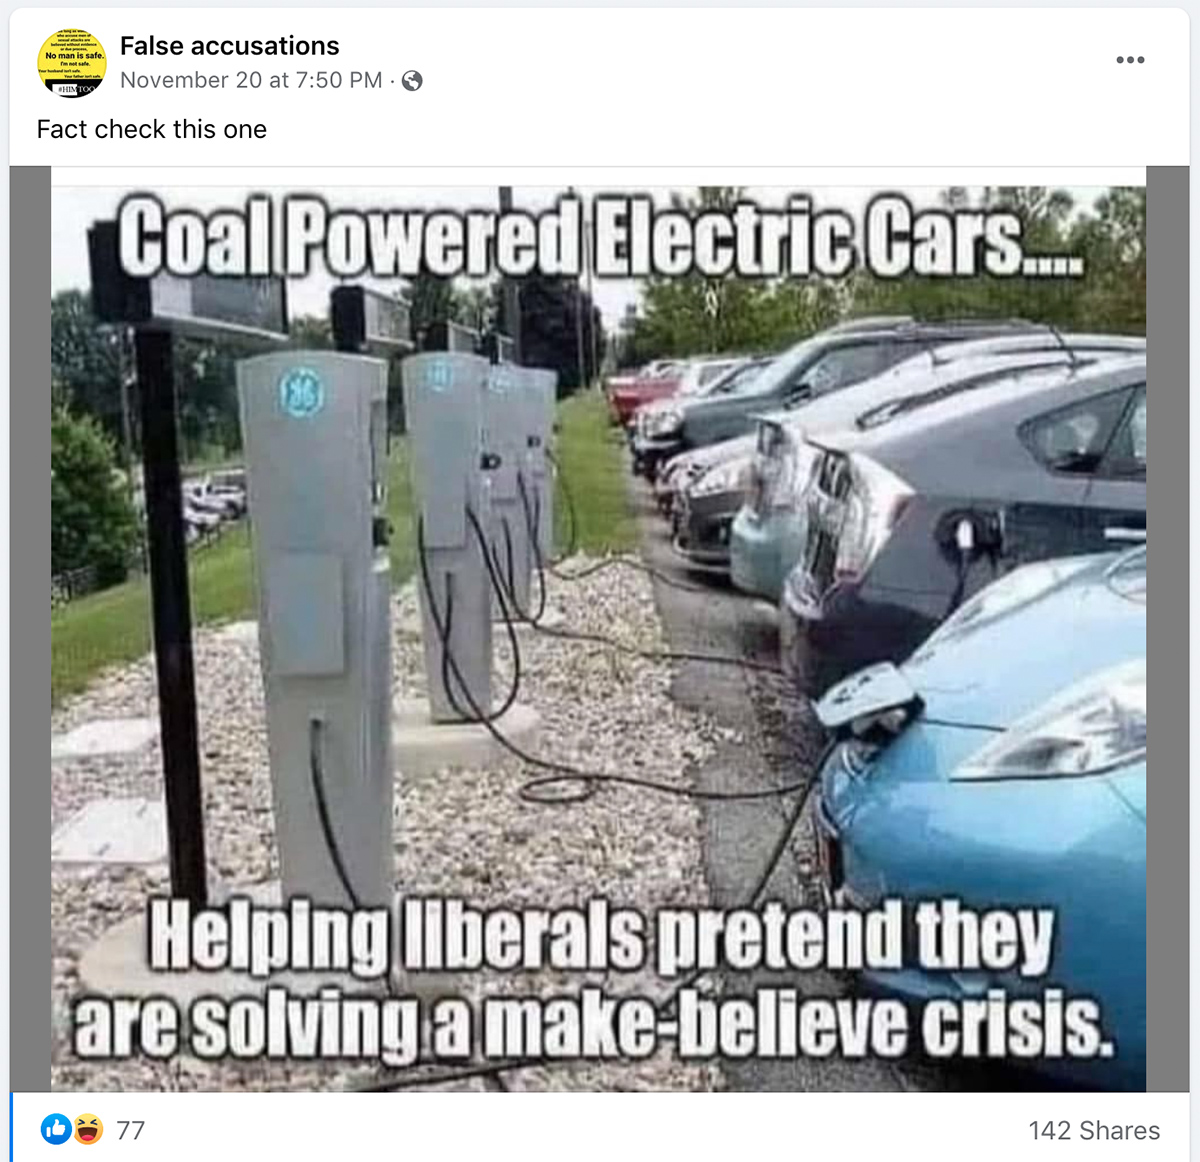 A meme did not show coal powered electric cars in a parking lot.